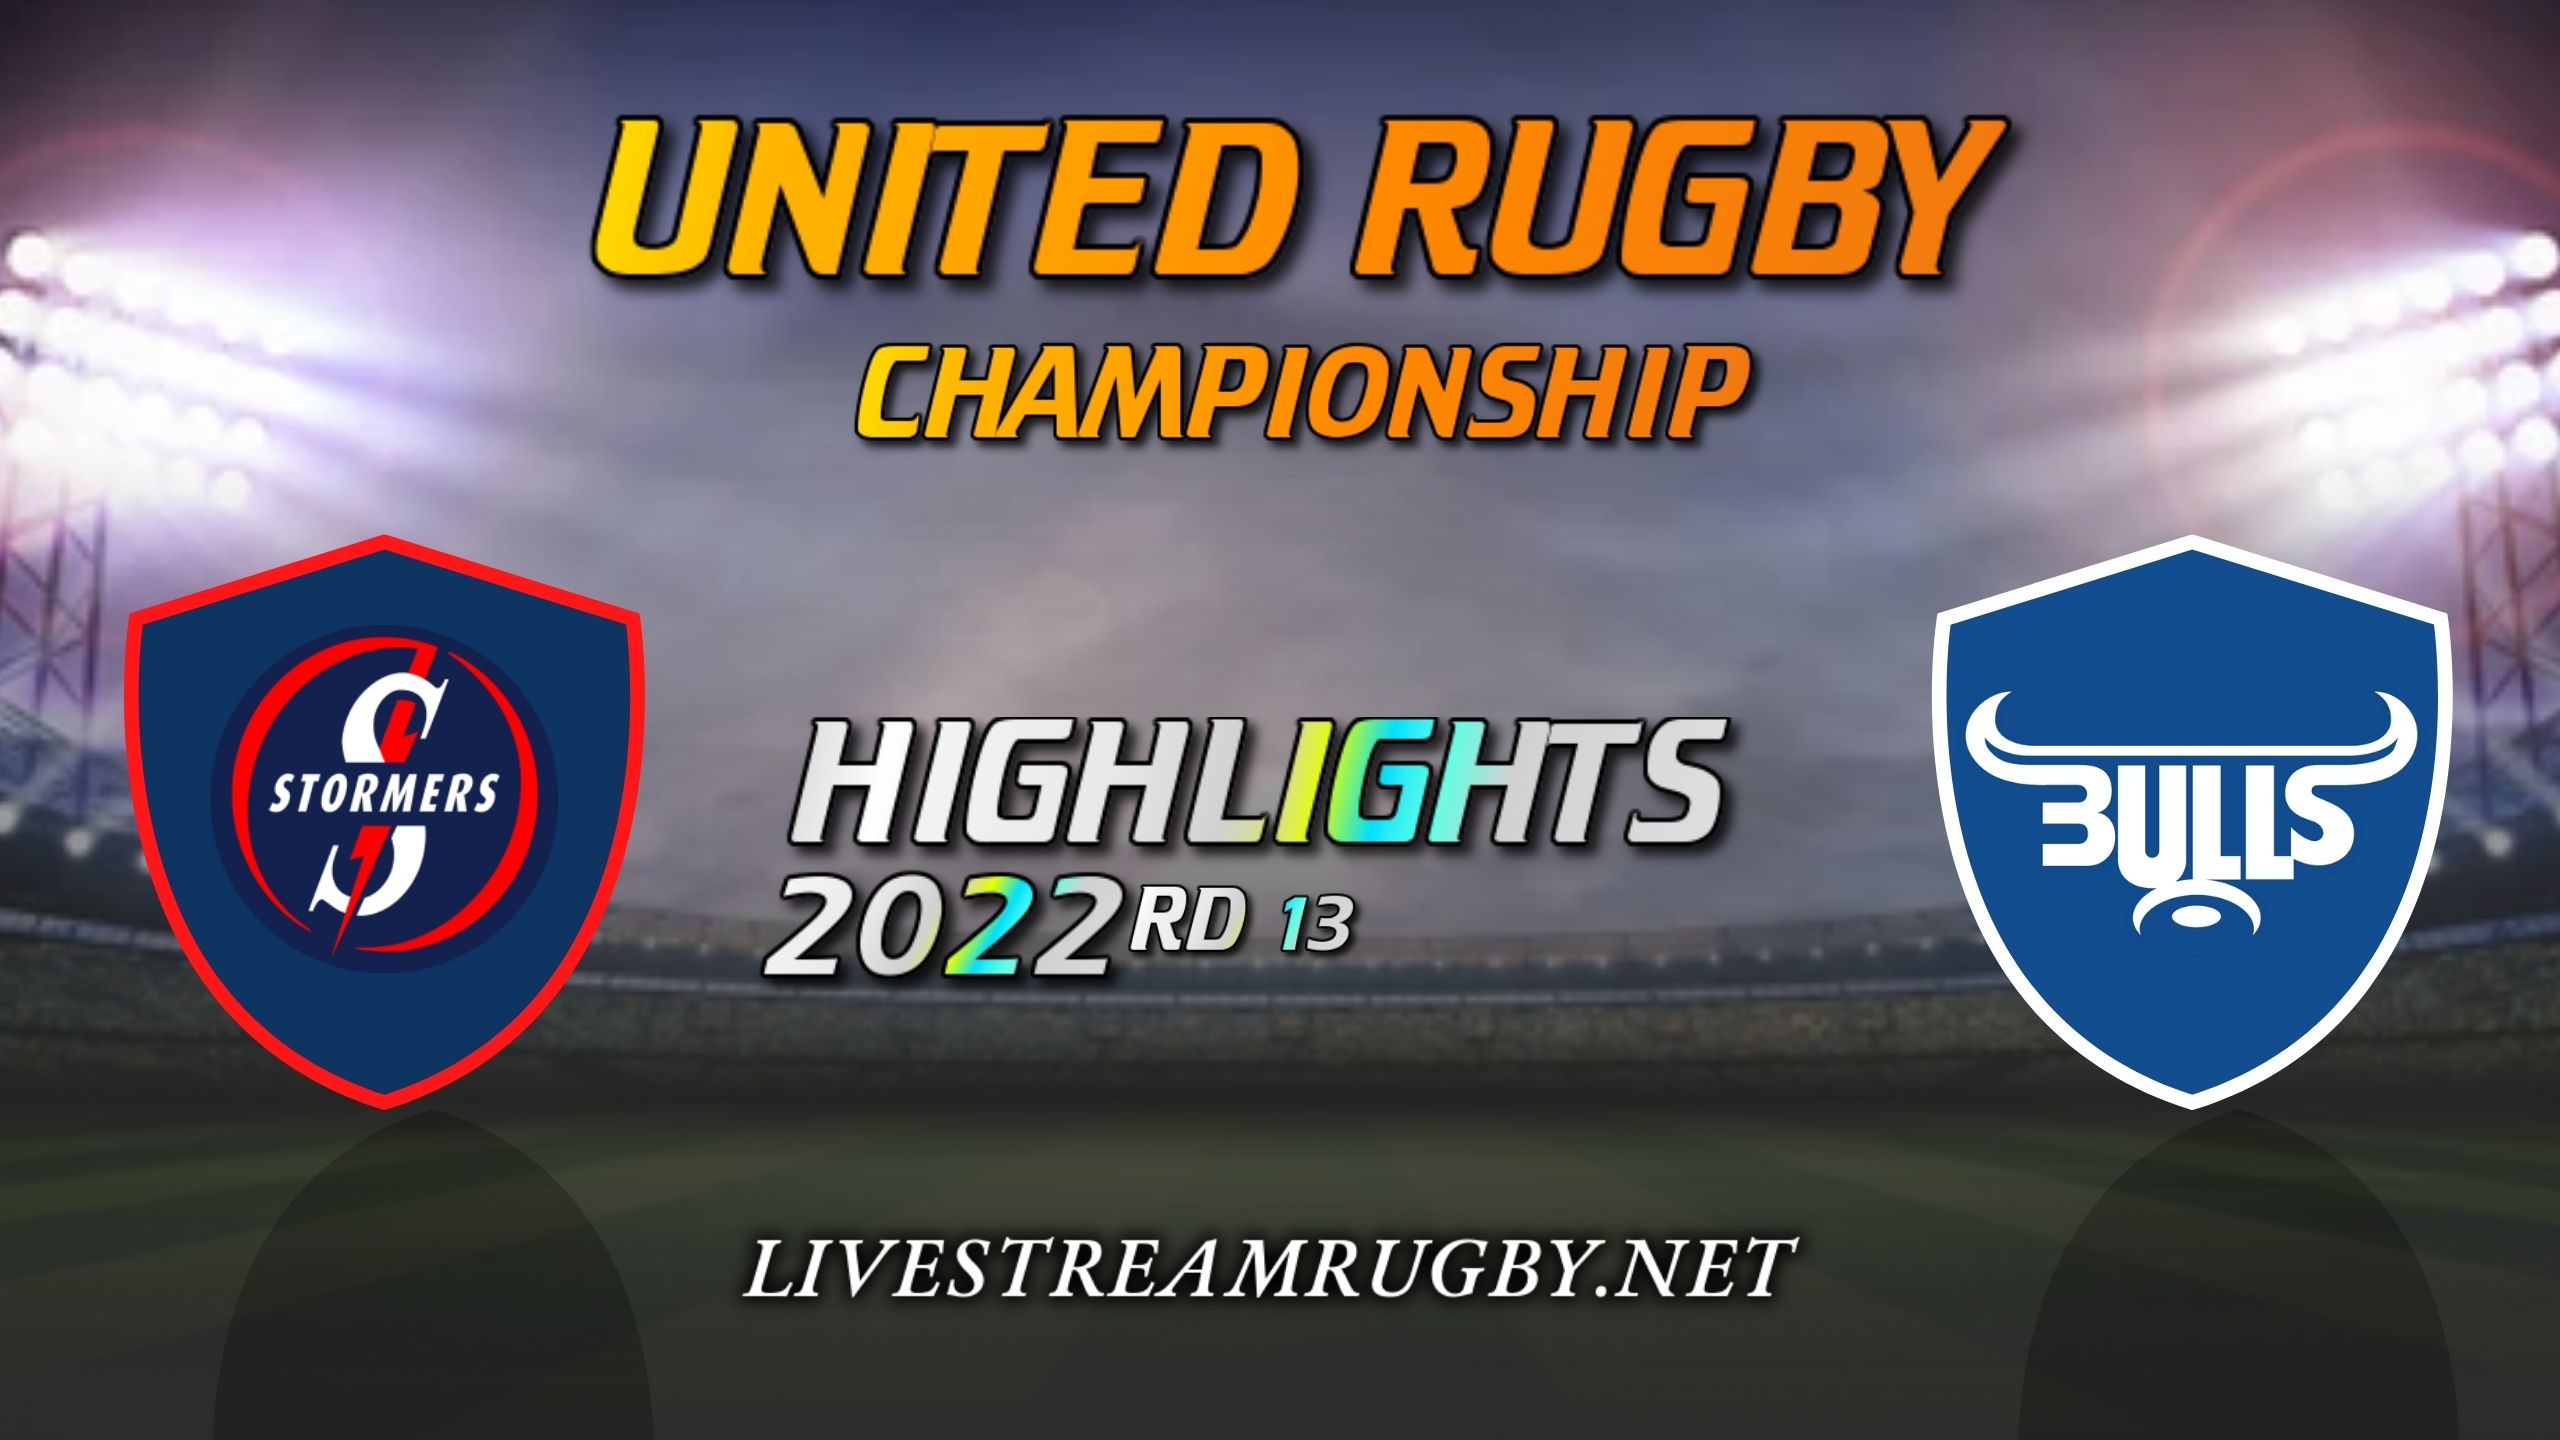 Stormers Vs Bulls Highlights 2022 Rd 13 United Rugby